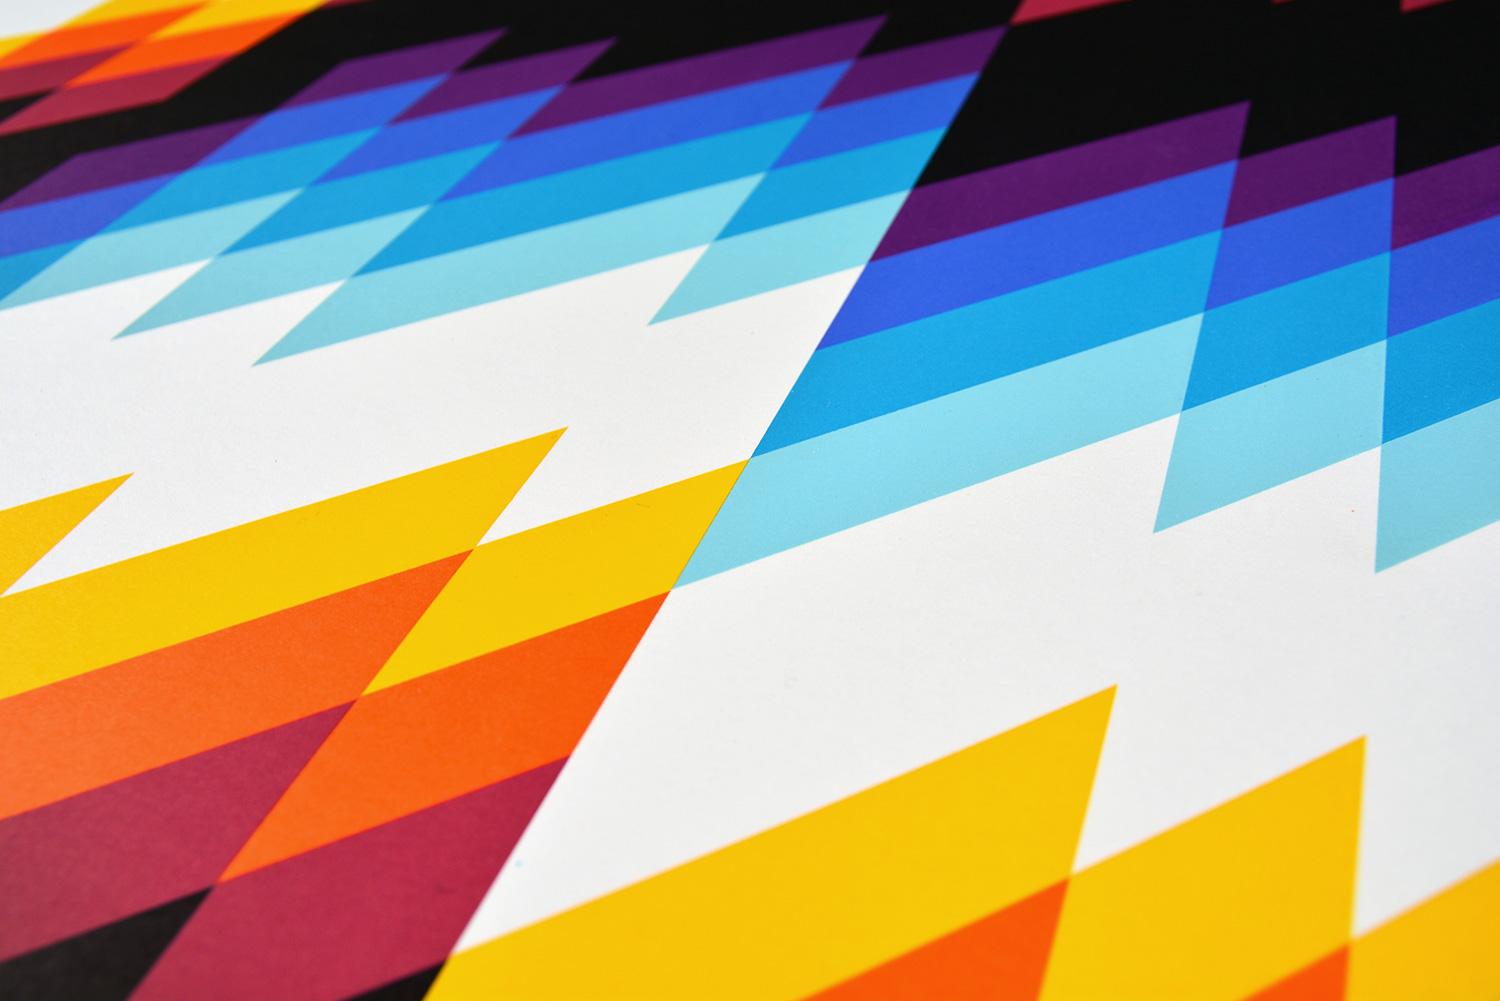 Felipe Pantone CHROMADYNA MICAP #1
Date of creation: 2020
Medium: Lithograph on paper
Edition number: 24/30
Size: 75.5 x 55.5 cm
Condition: New, in mint condition and never framed
Lithograph on paper hand signed and numbered on the back by the